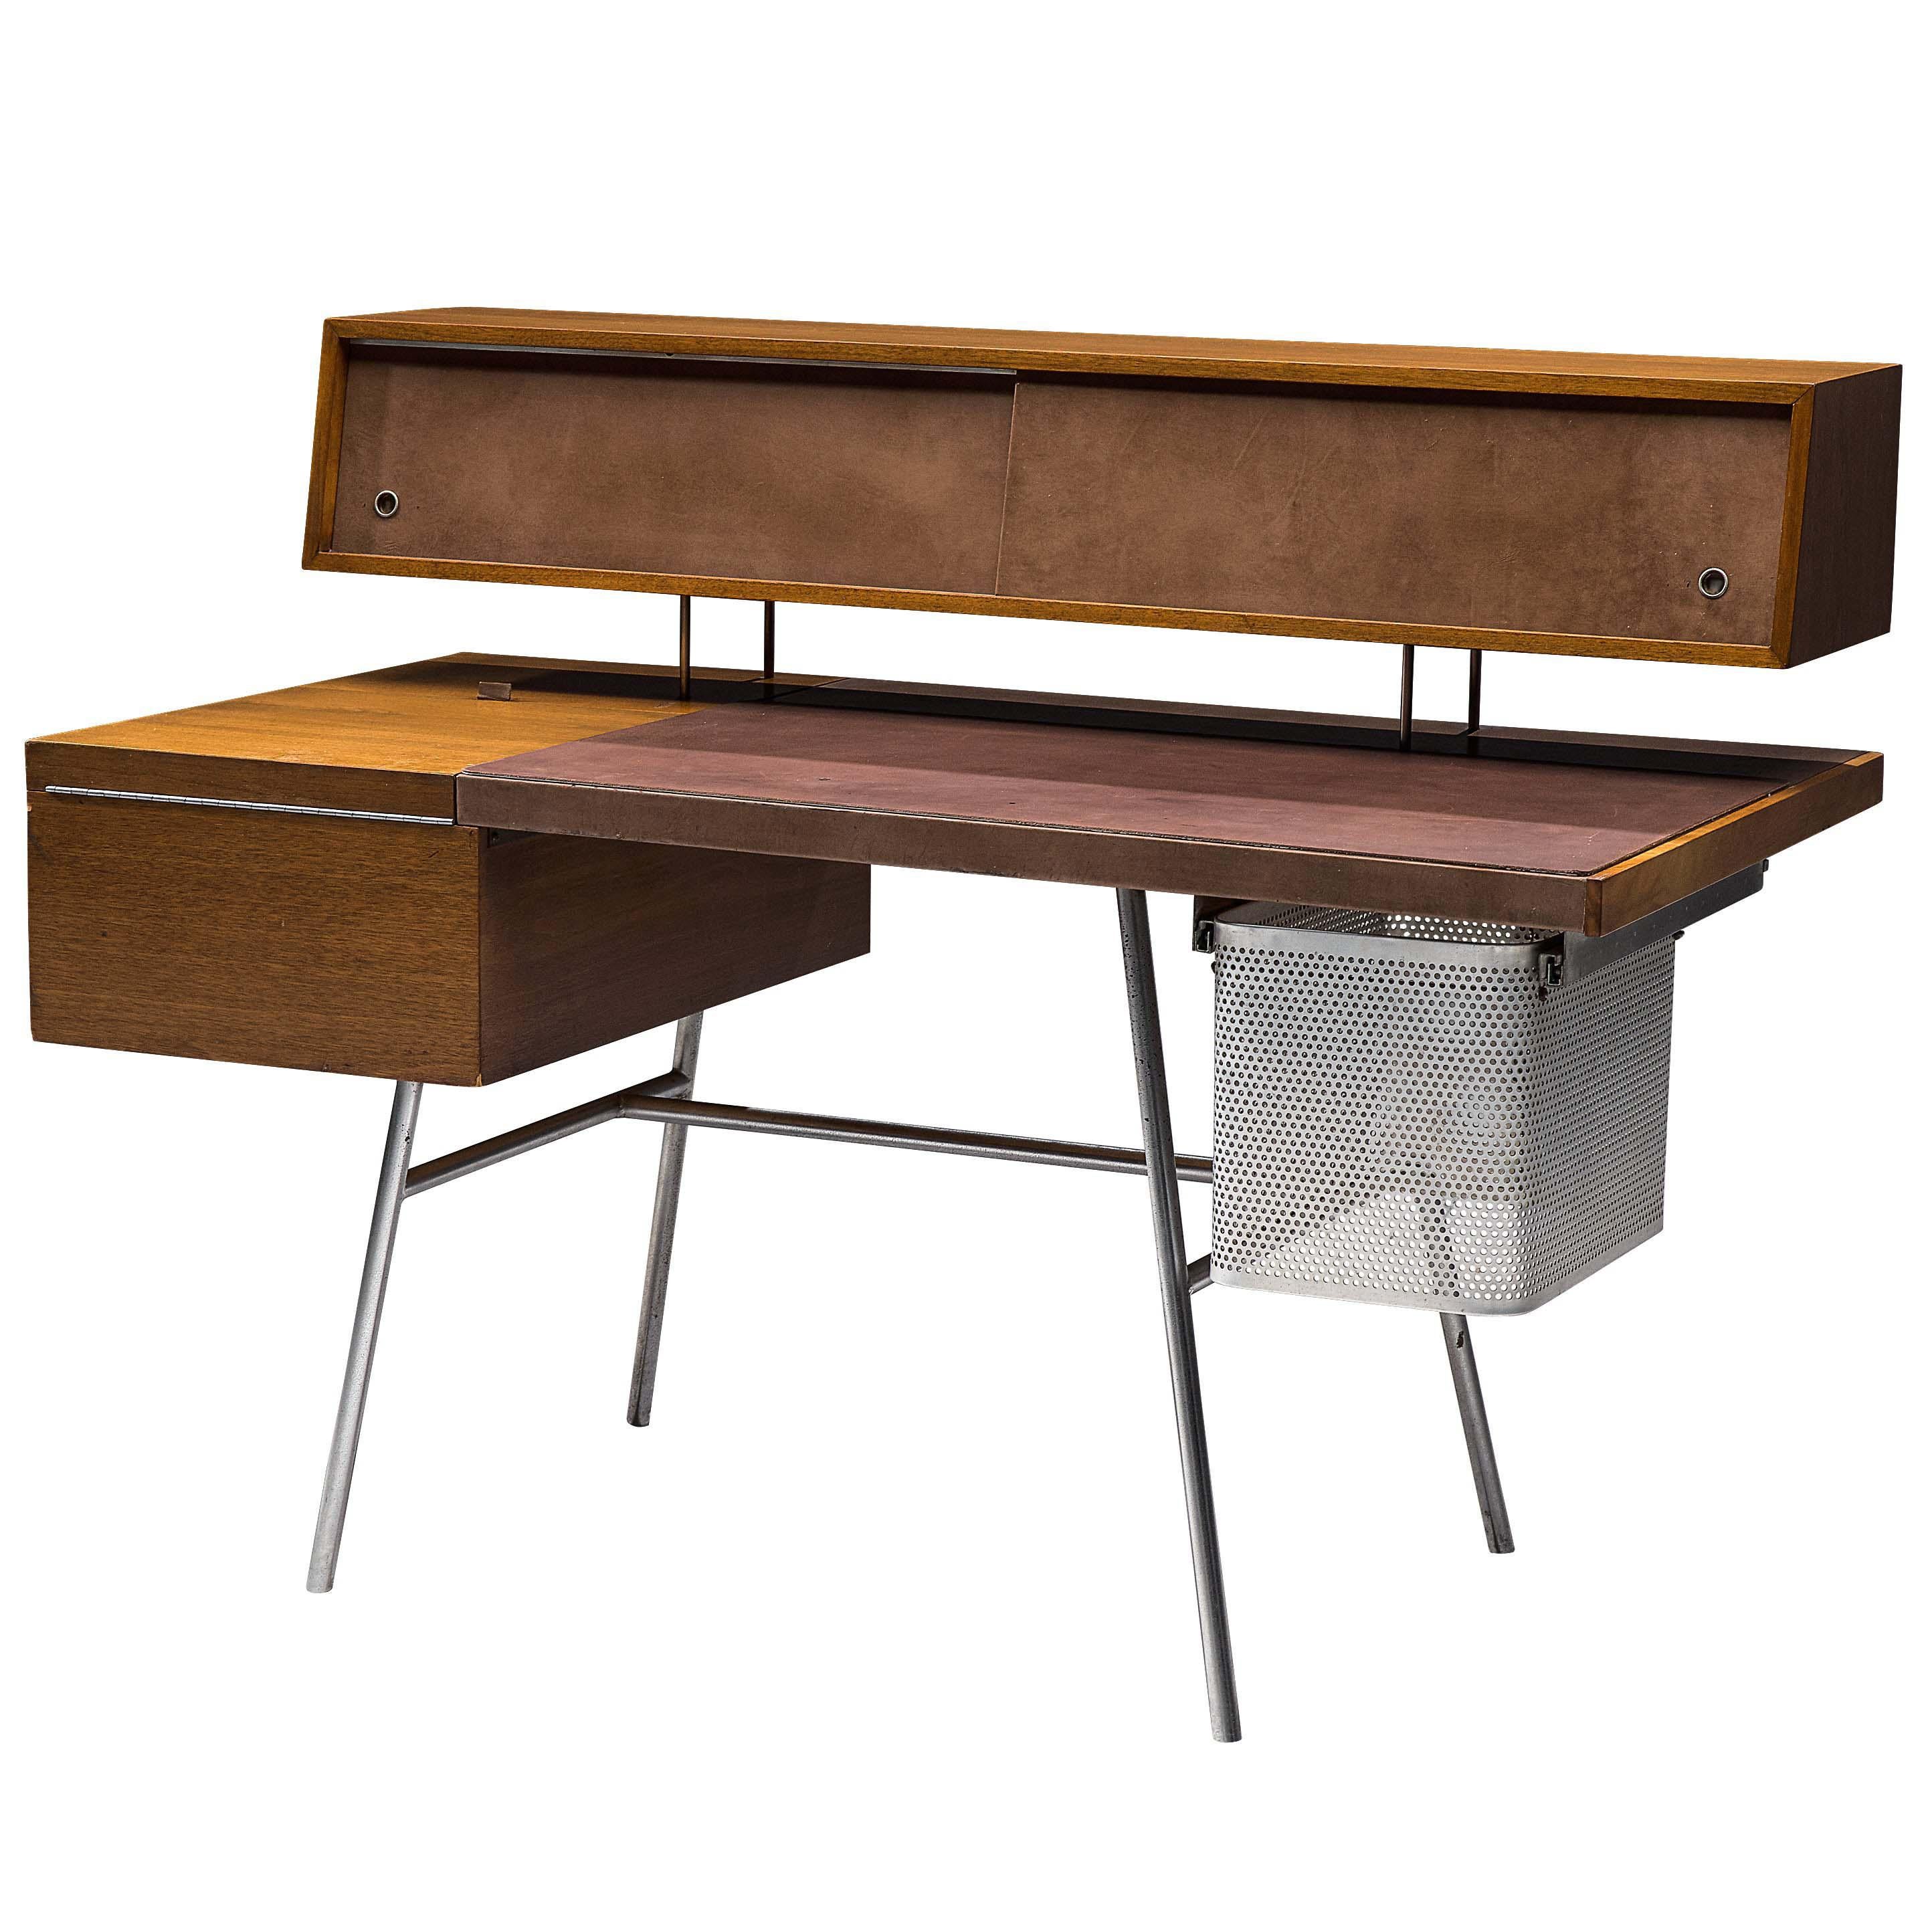 George Nelson for H. Miller Desk Model 4658 in Walnut, Leather and Steel